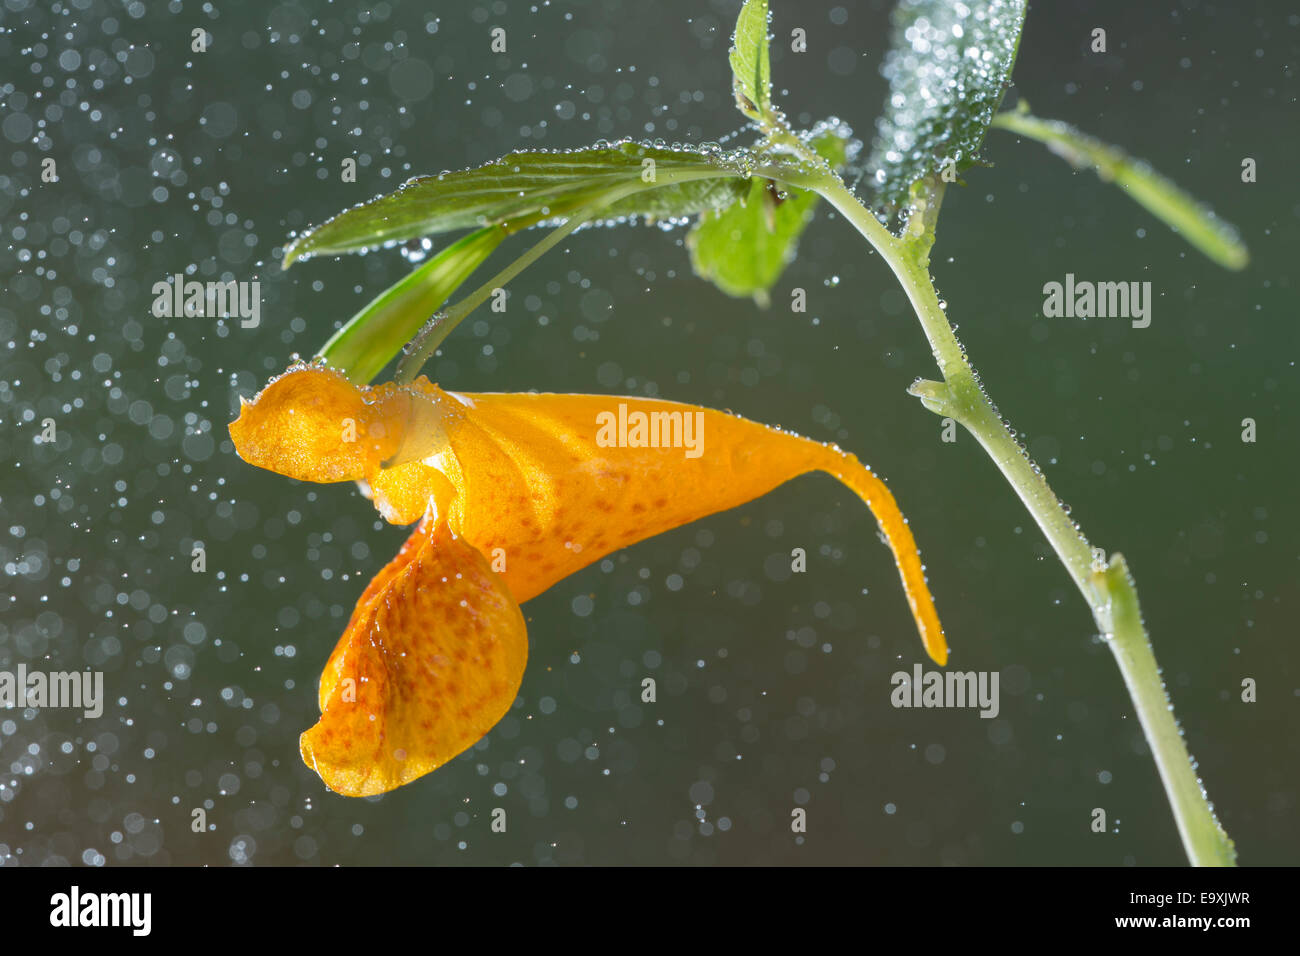 Impatiens capensis, the orange jewelweed, common jewelweed, spotted jewelweed, spotted touch-me-not flower with dew drops Stock Photo